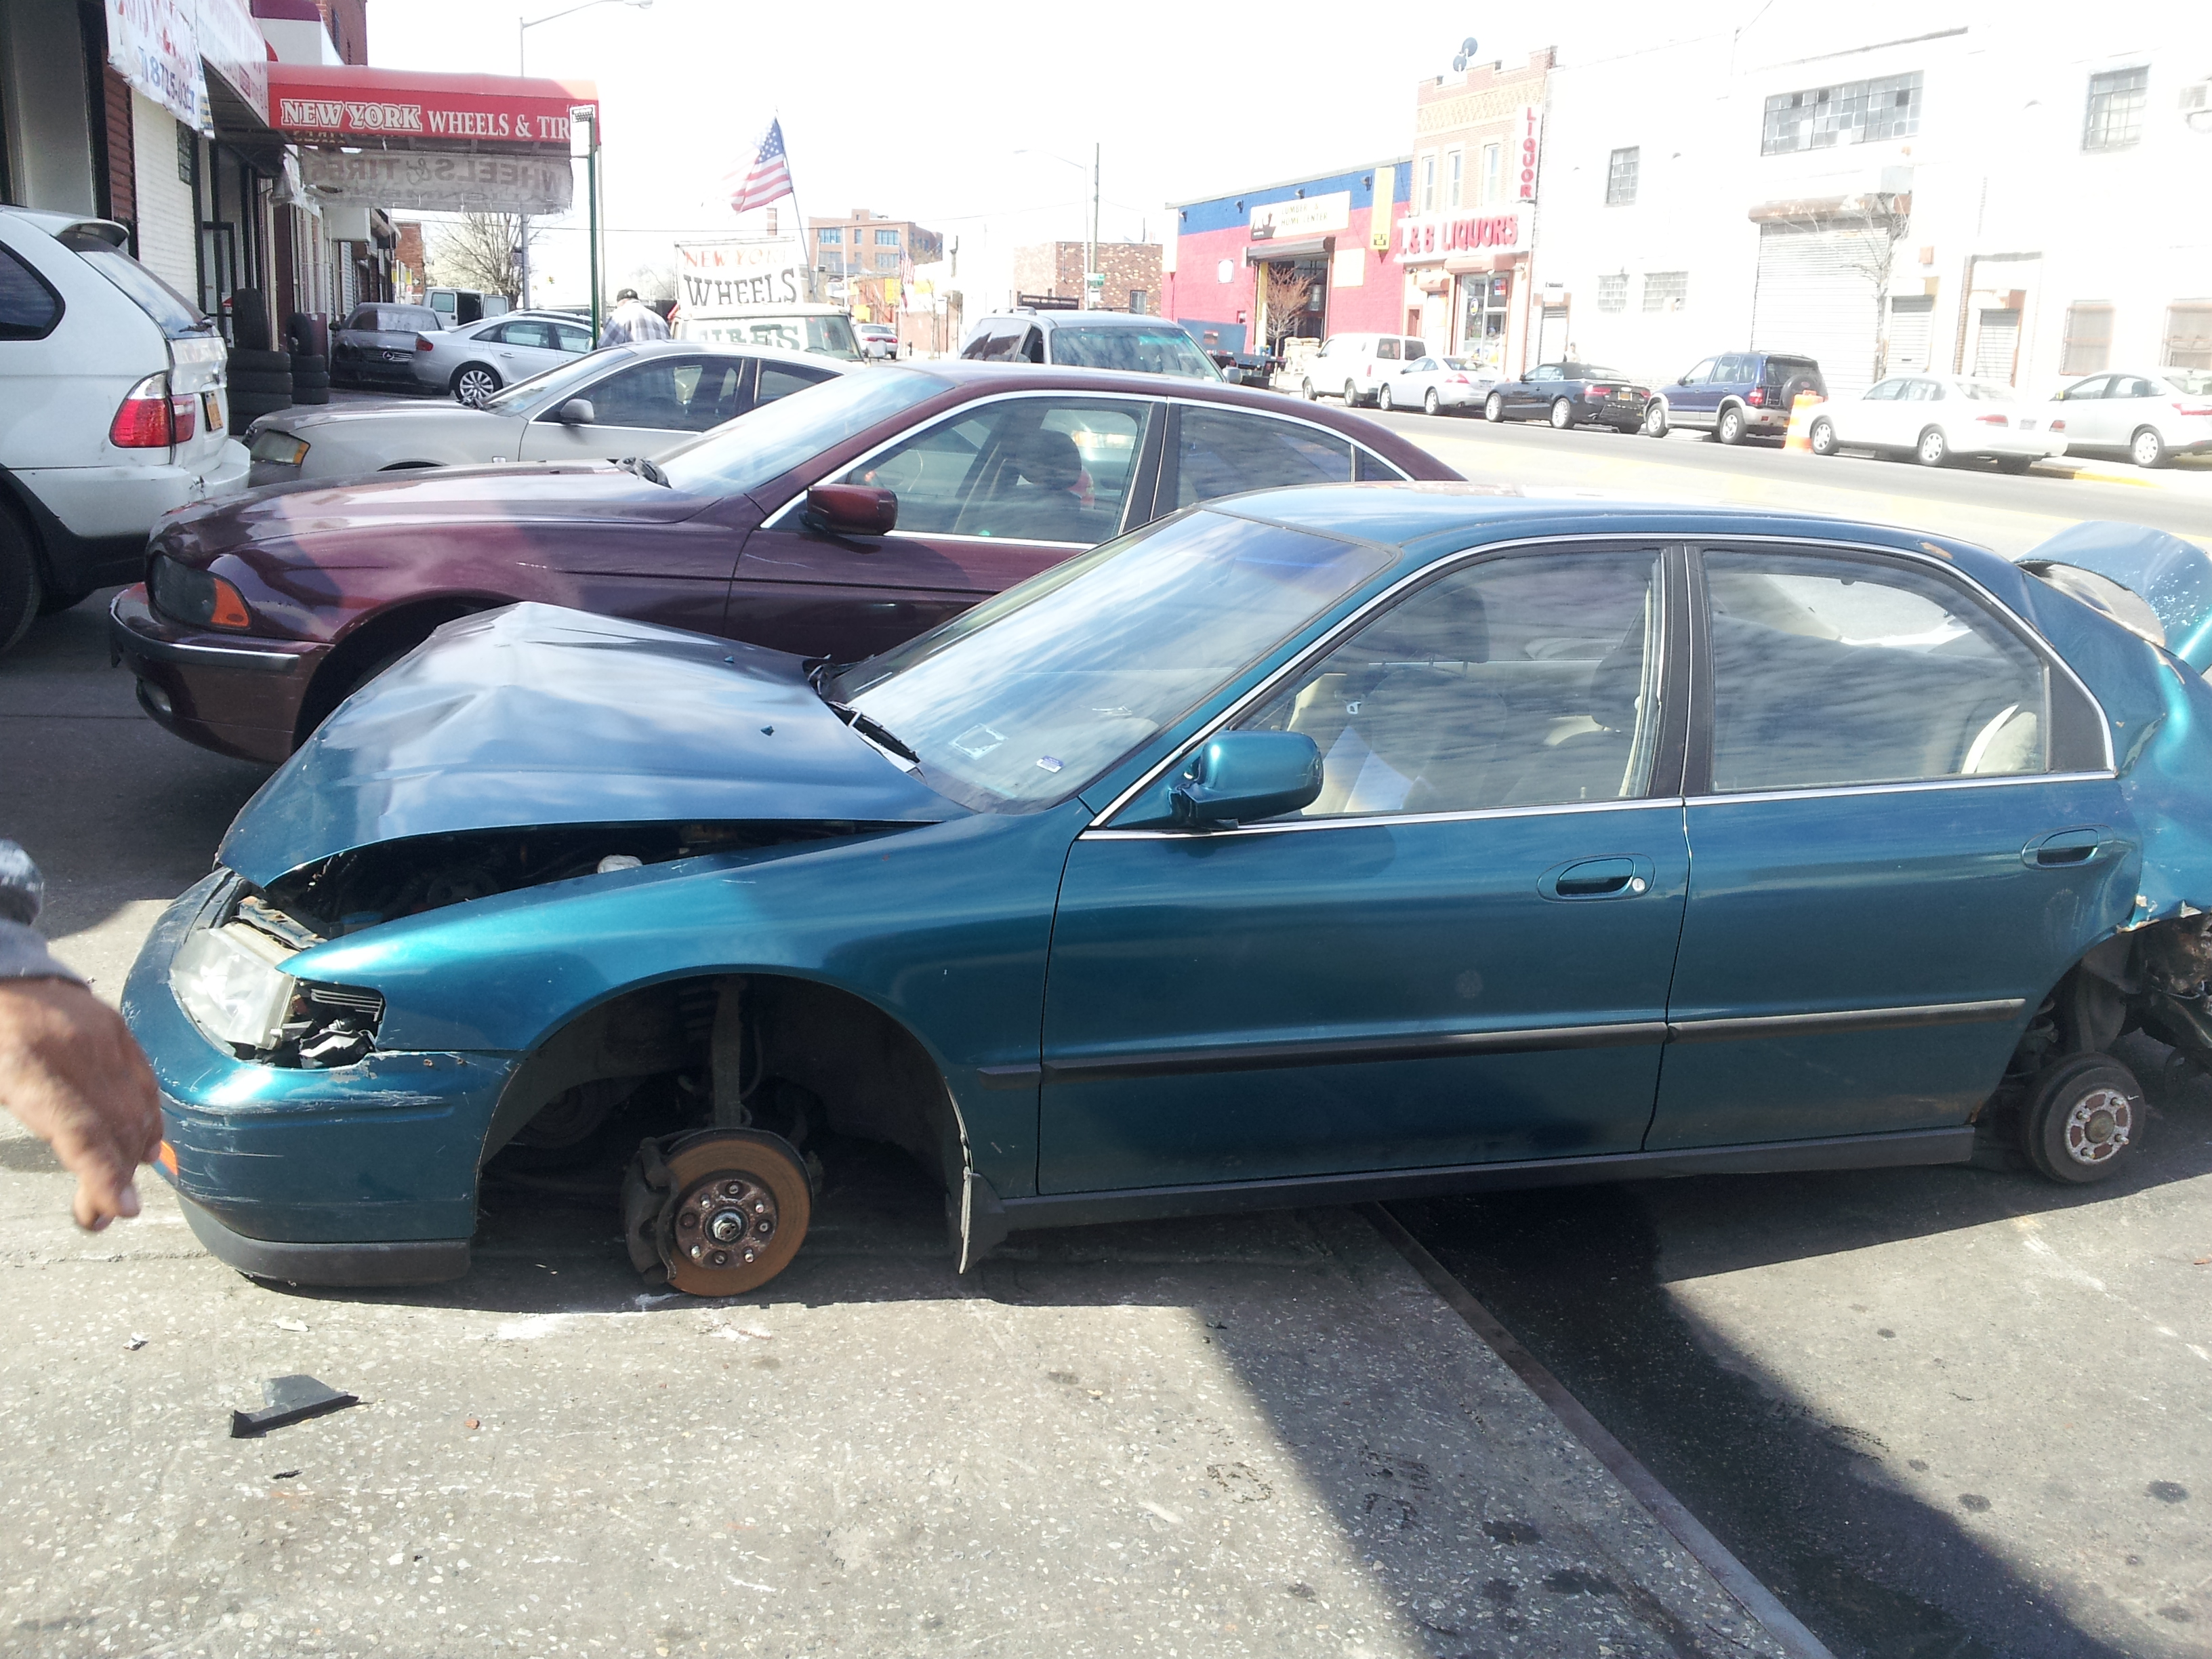 Junk Your Car in Queens, New York  for Quick Cash!